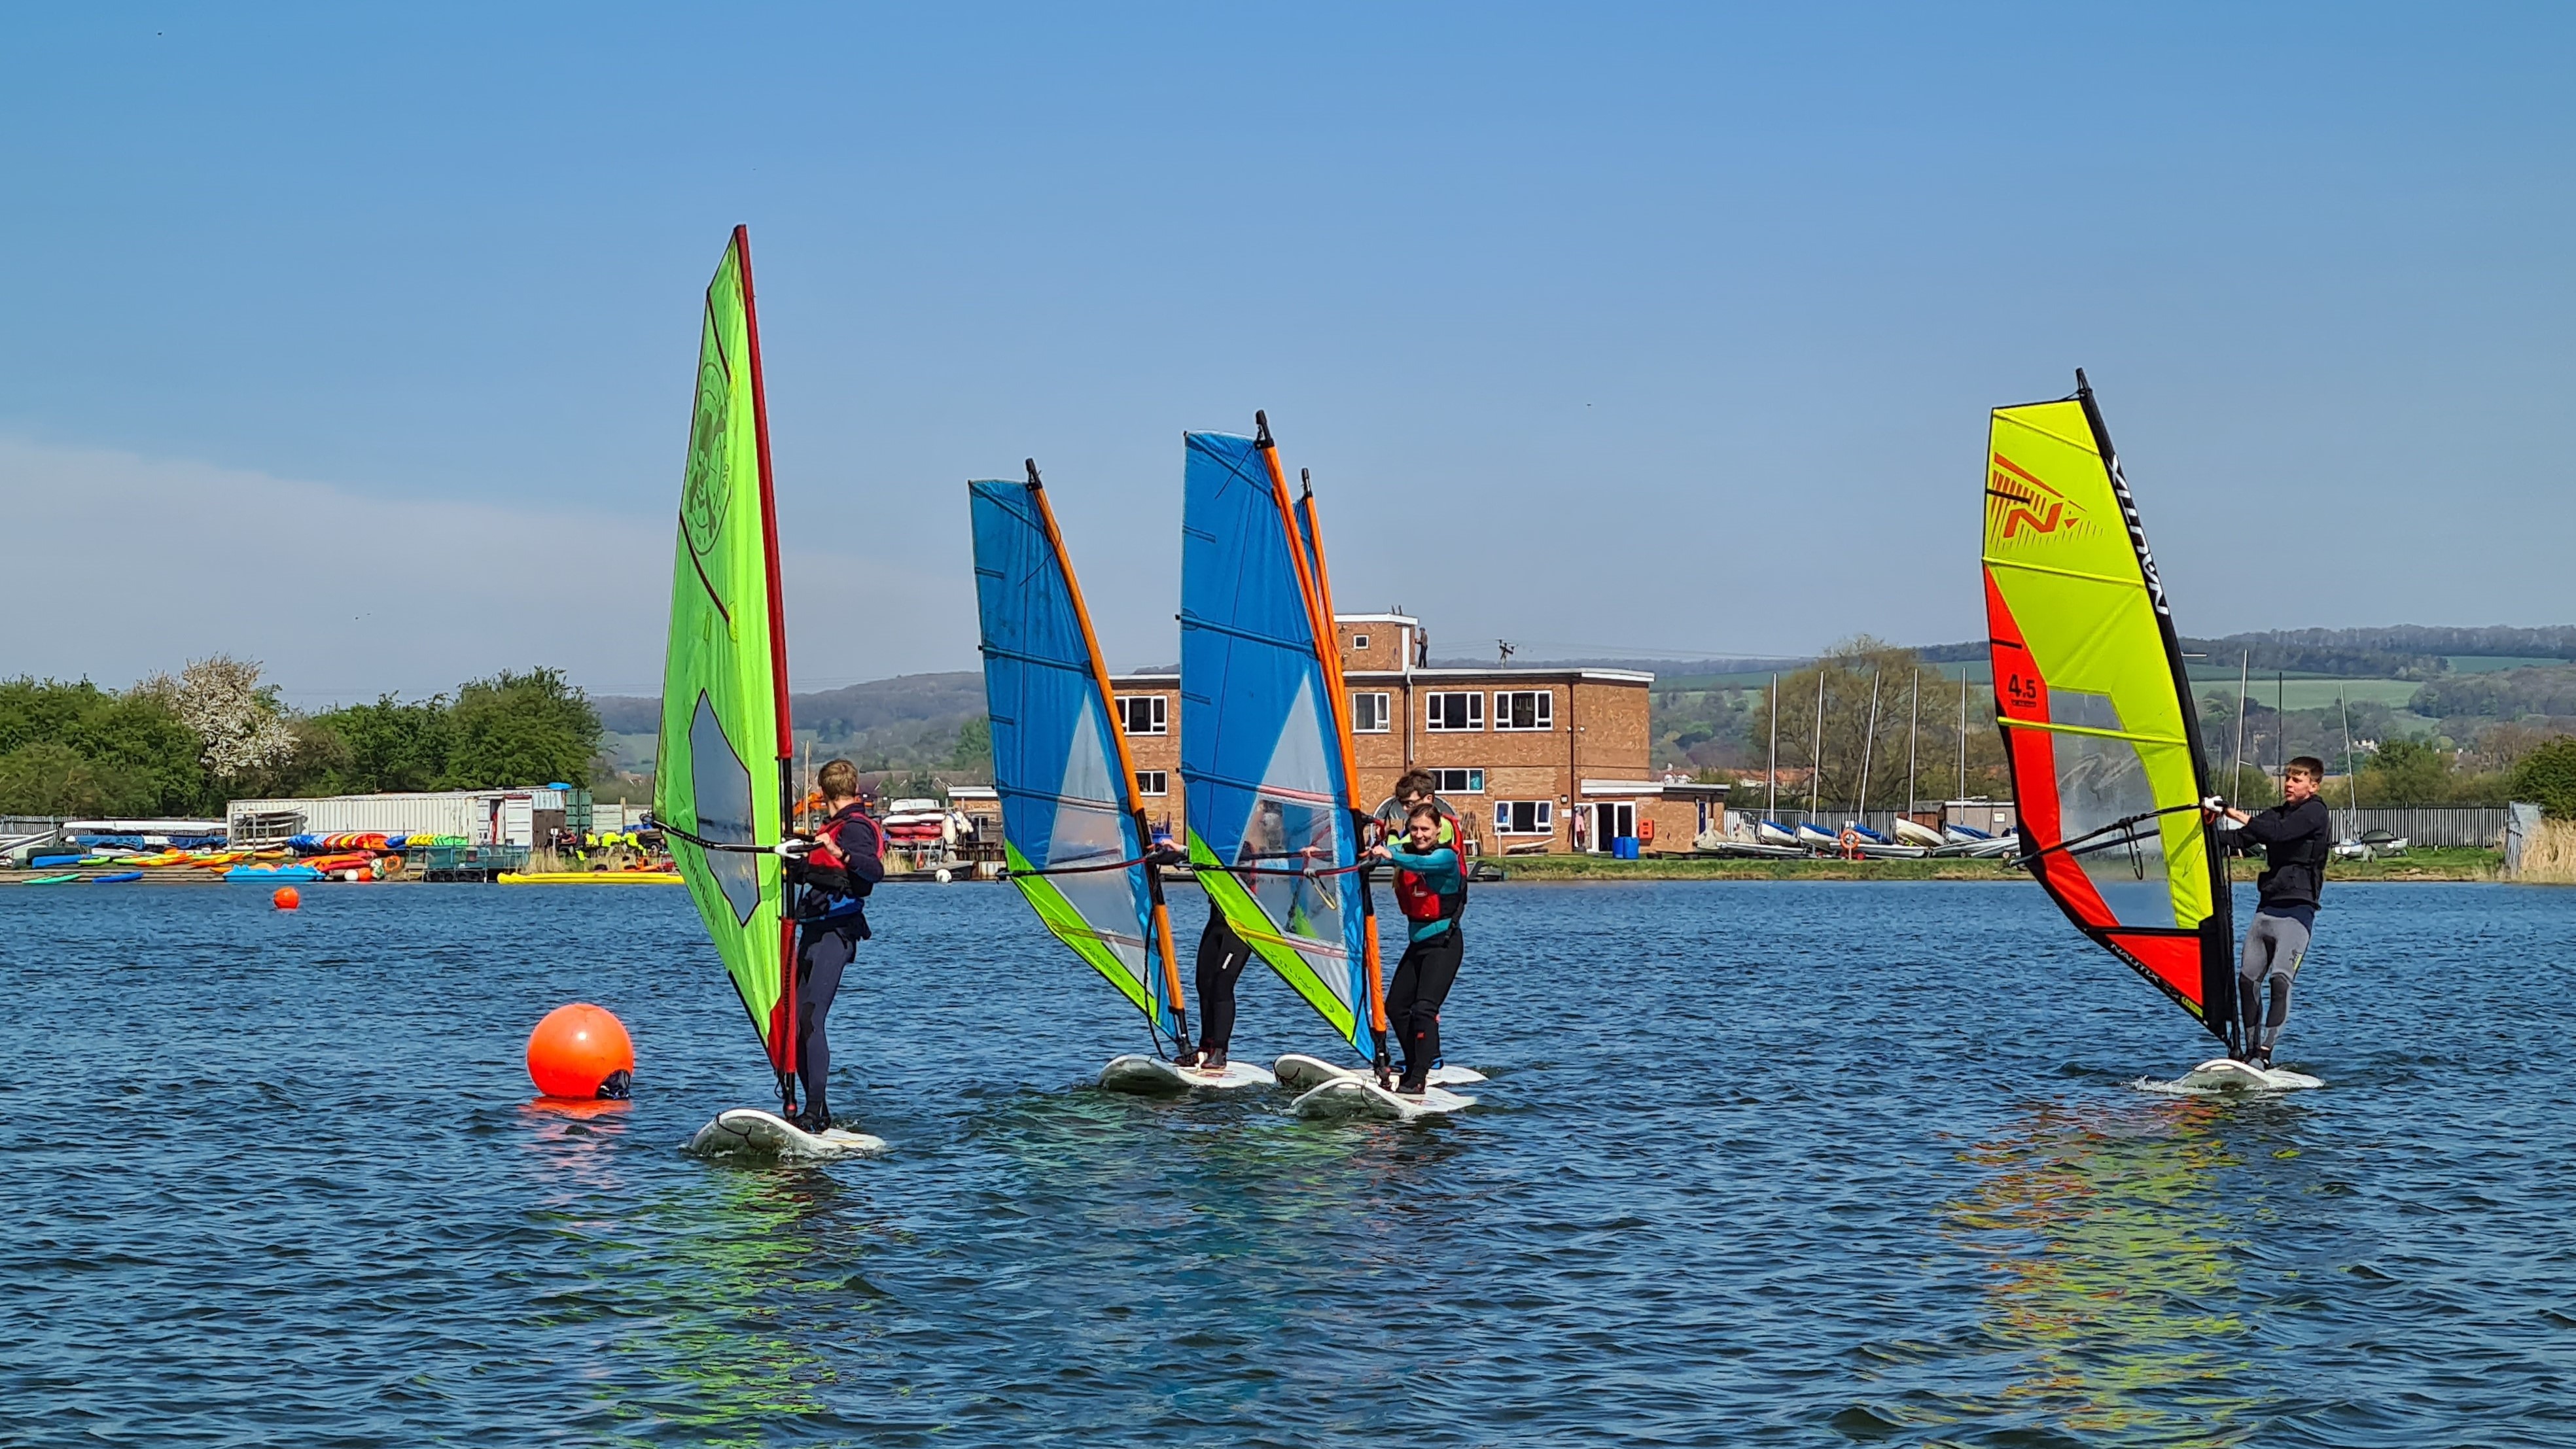 Windsurfers on the water with at Welton Waters Adventure Centre 